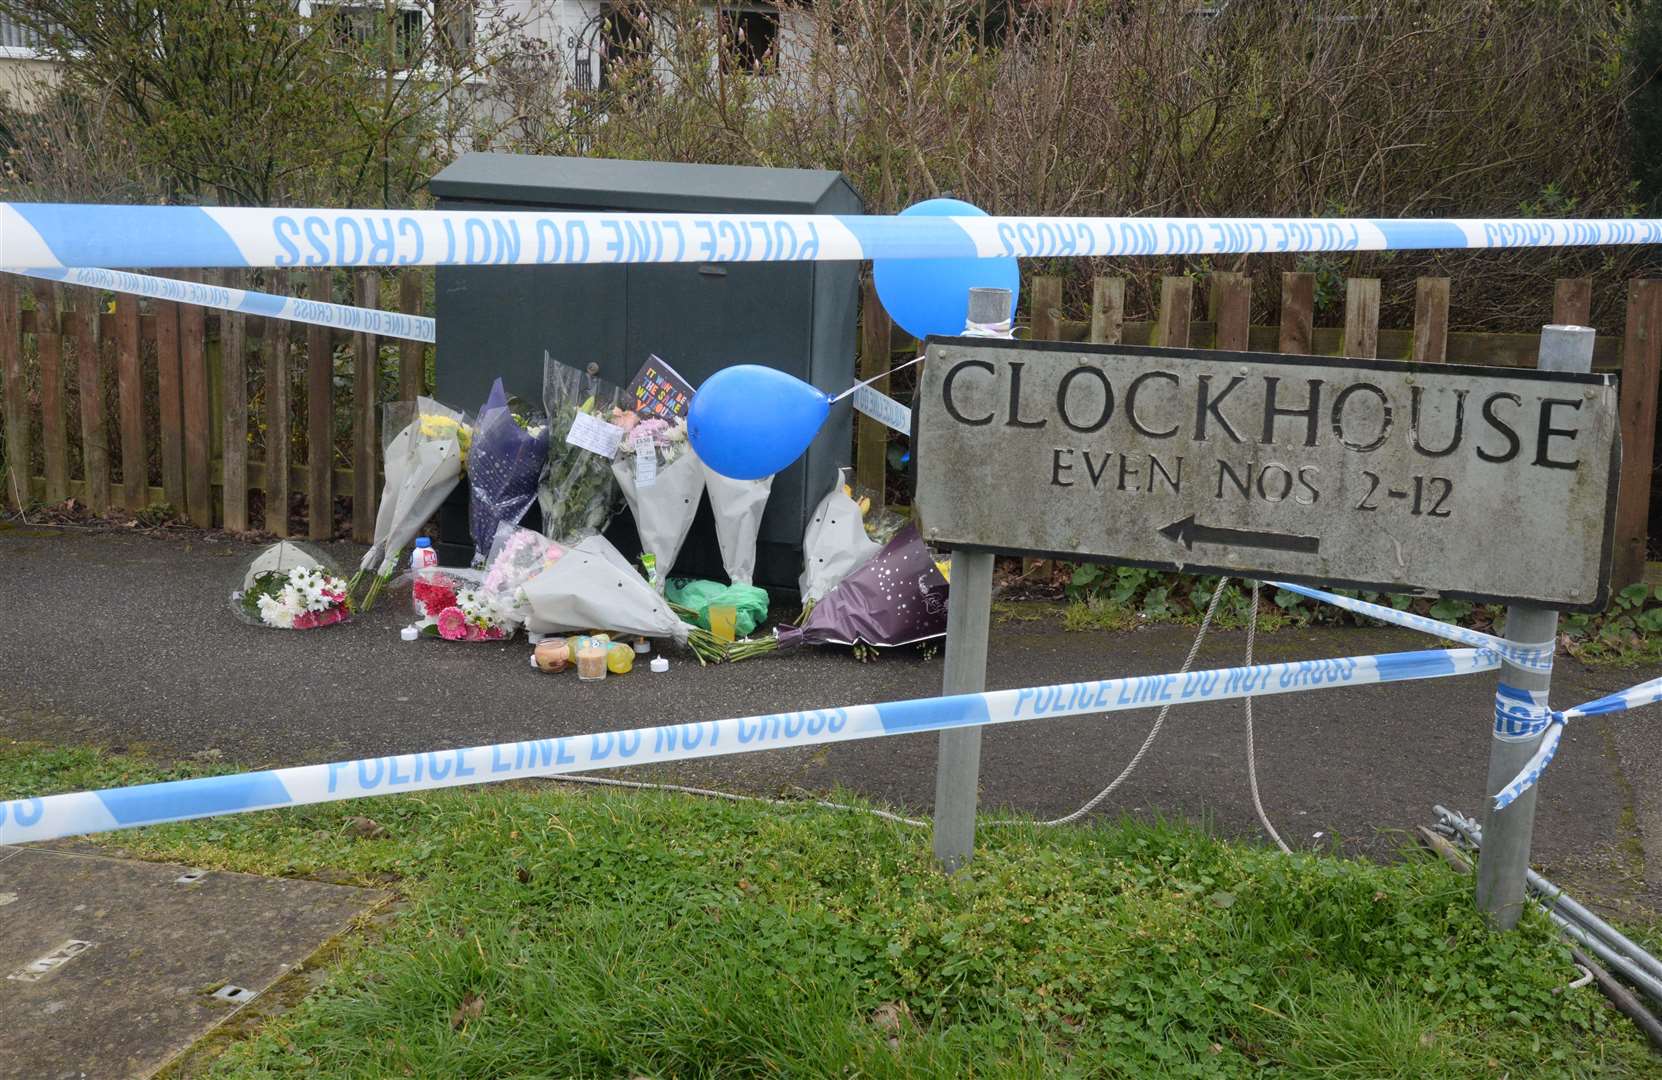 Floral tributes have been left near where the incident occurred. Picture: Chris Davey